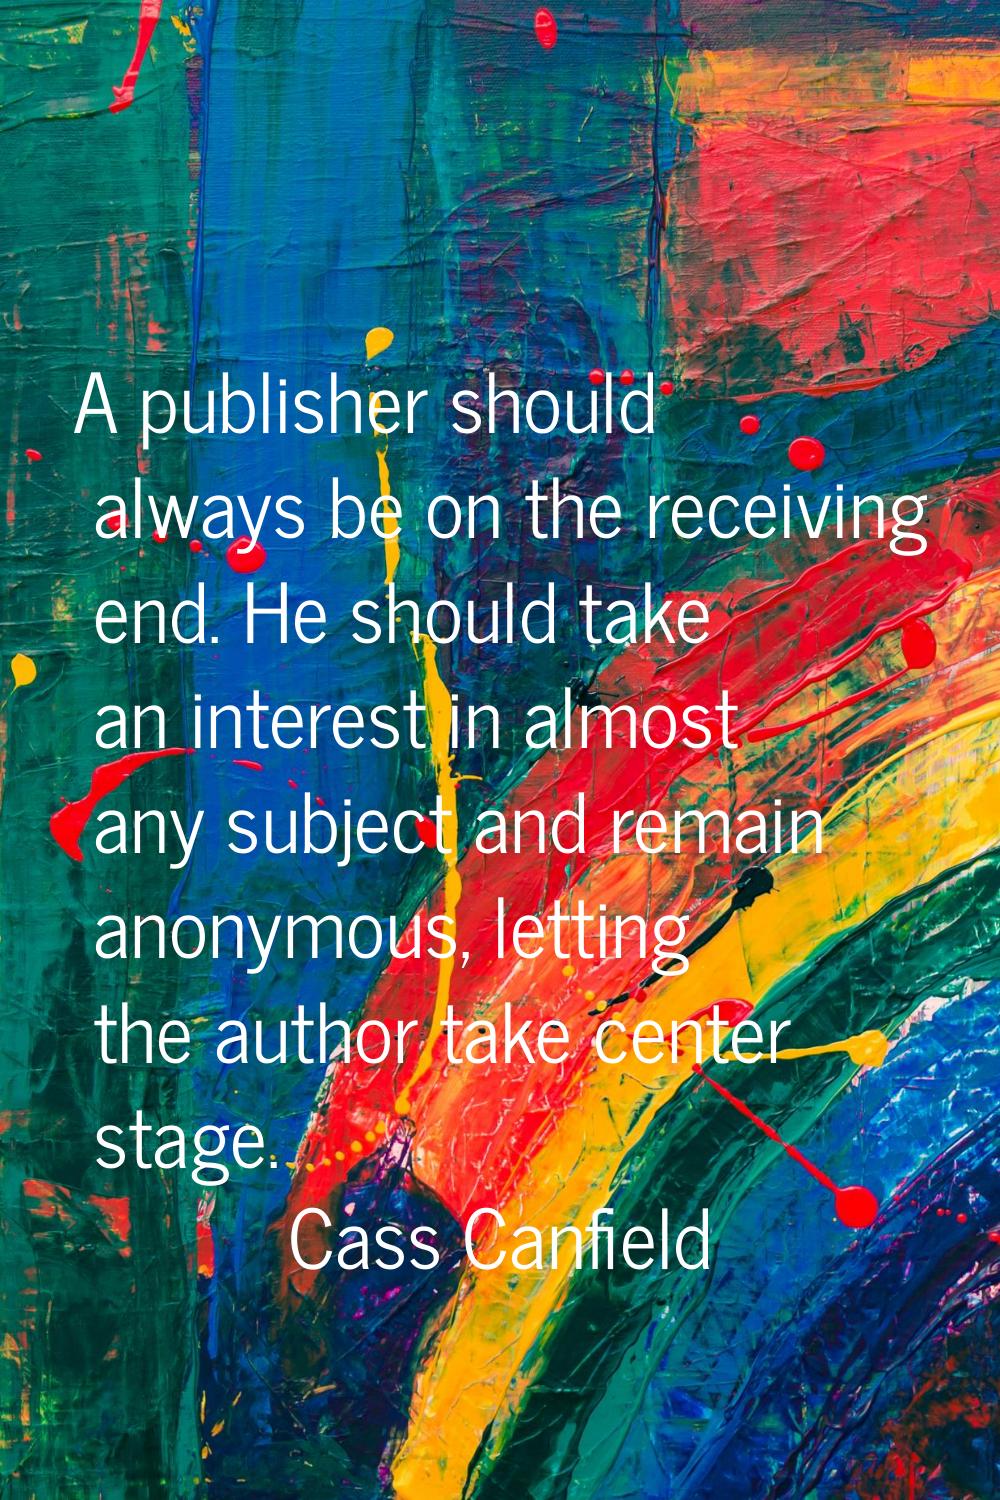 A publisher should always be on the receiving end. He should take an interest in almost any subject